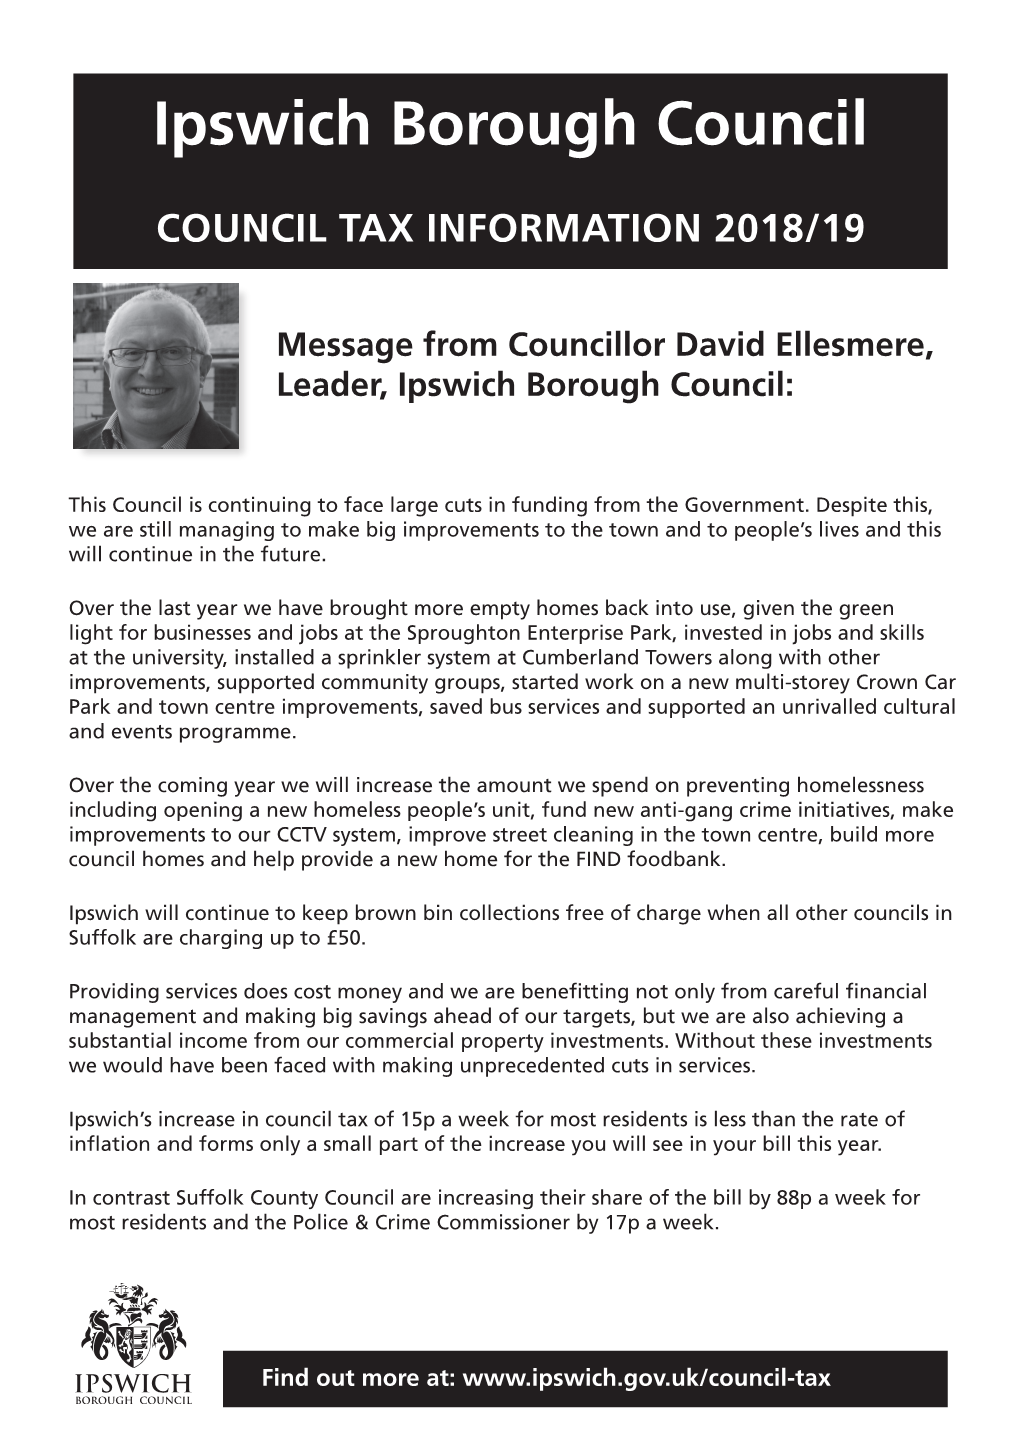 Council Tax Information 2018/19